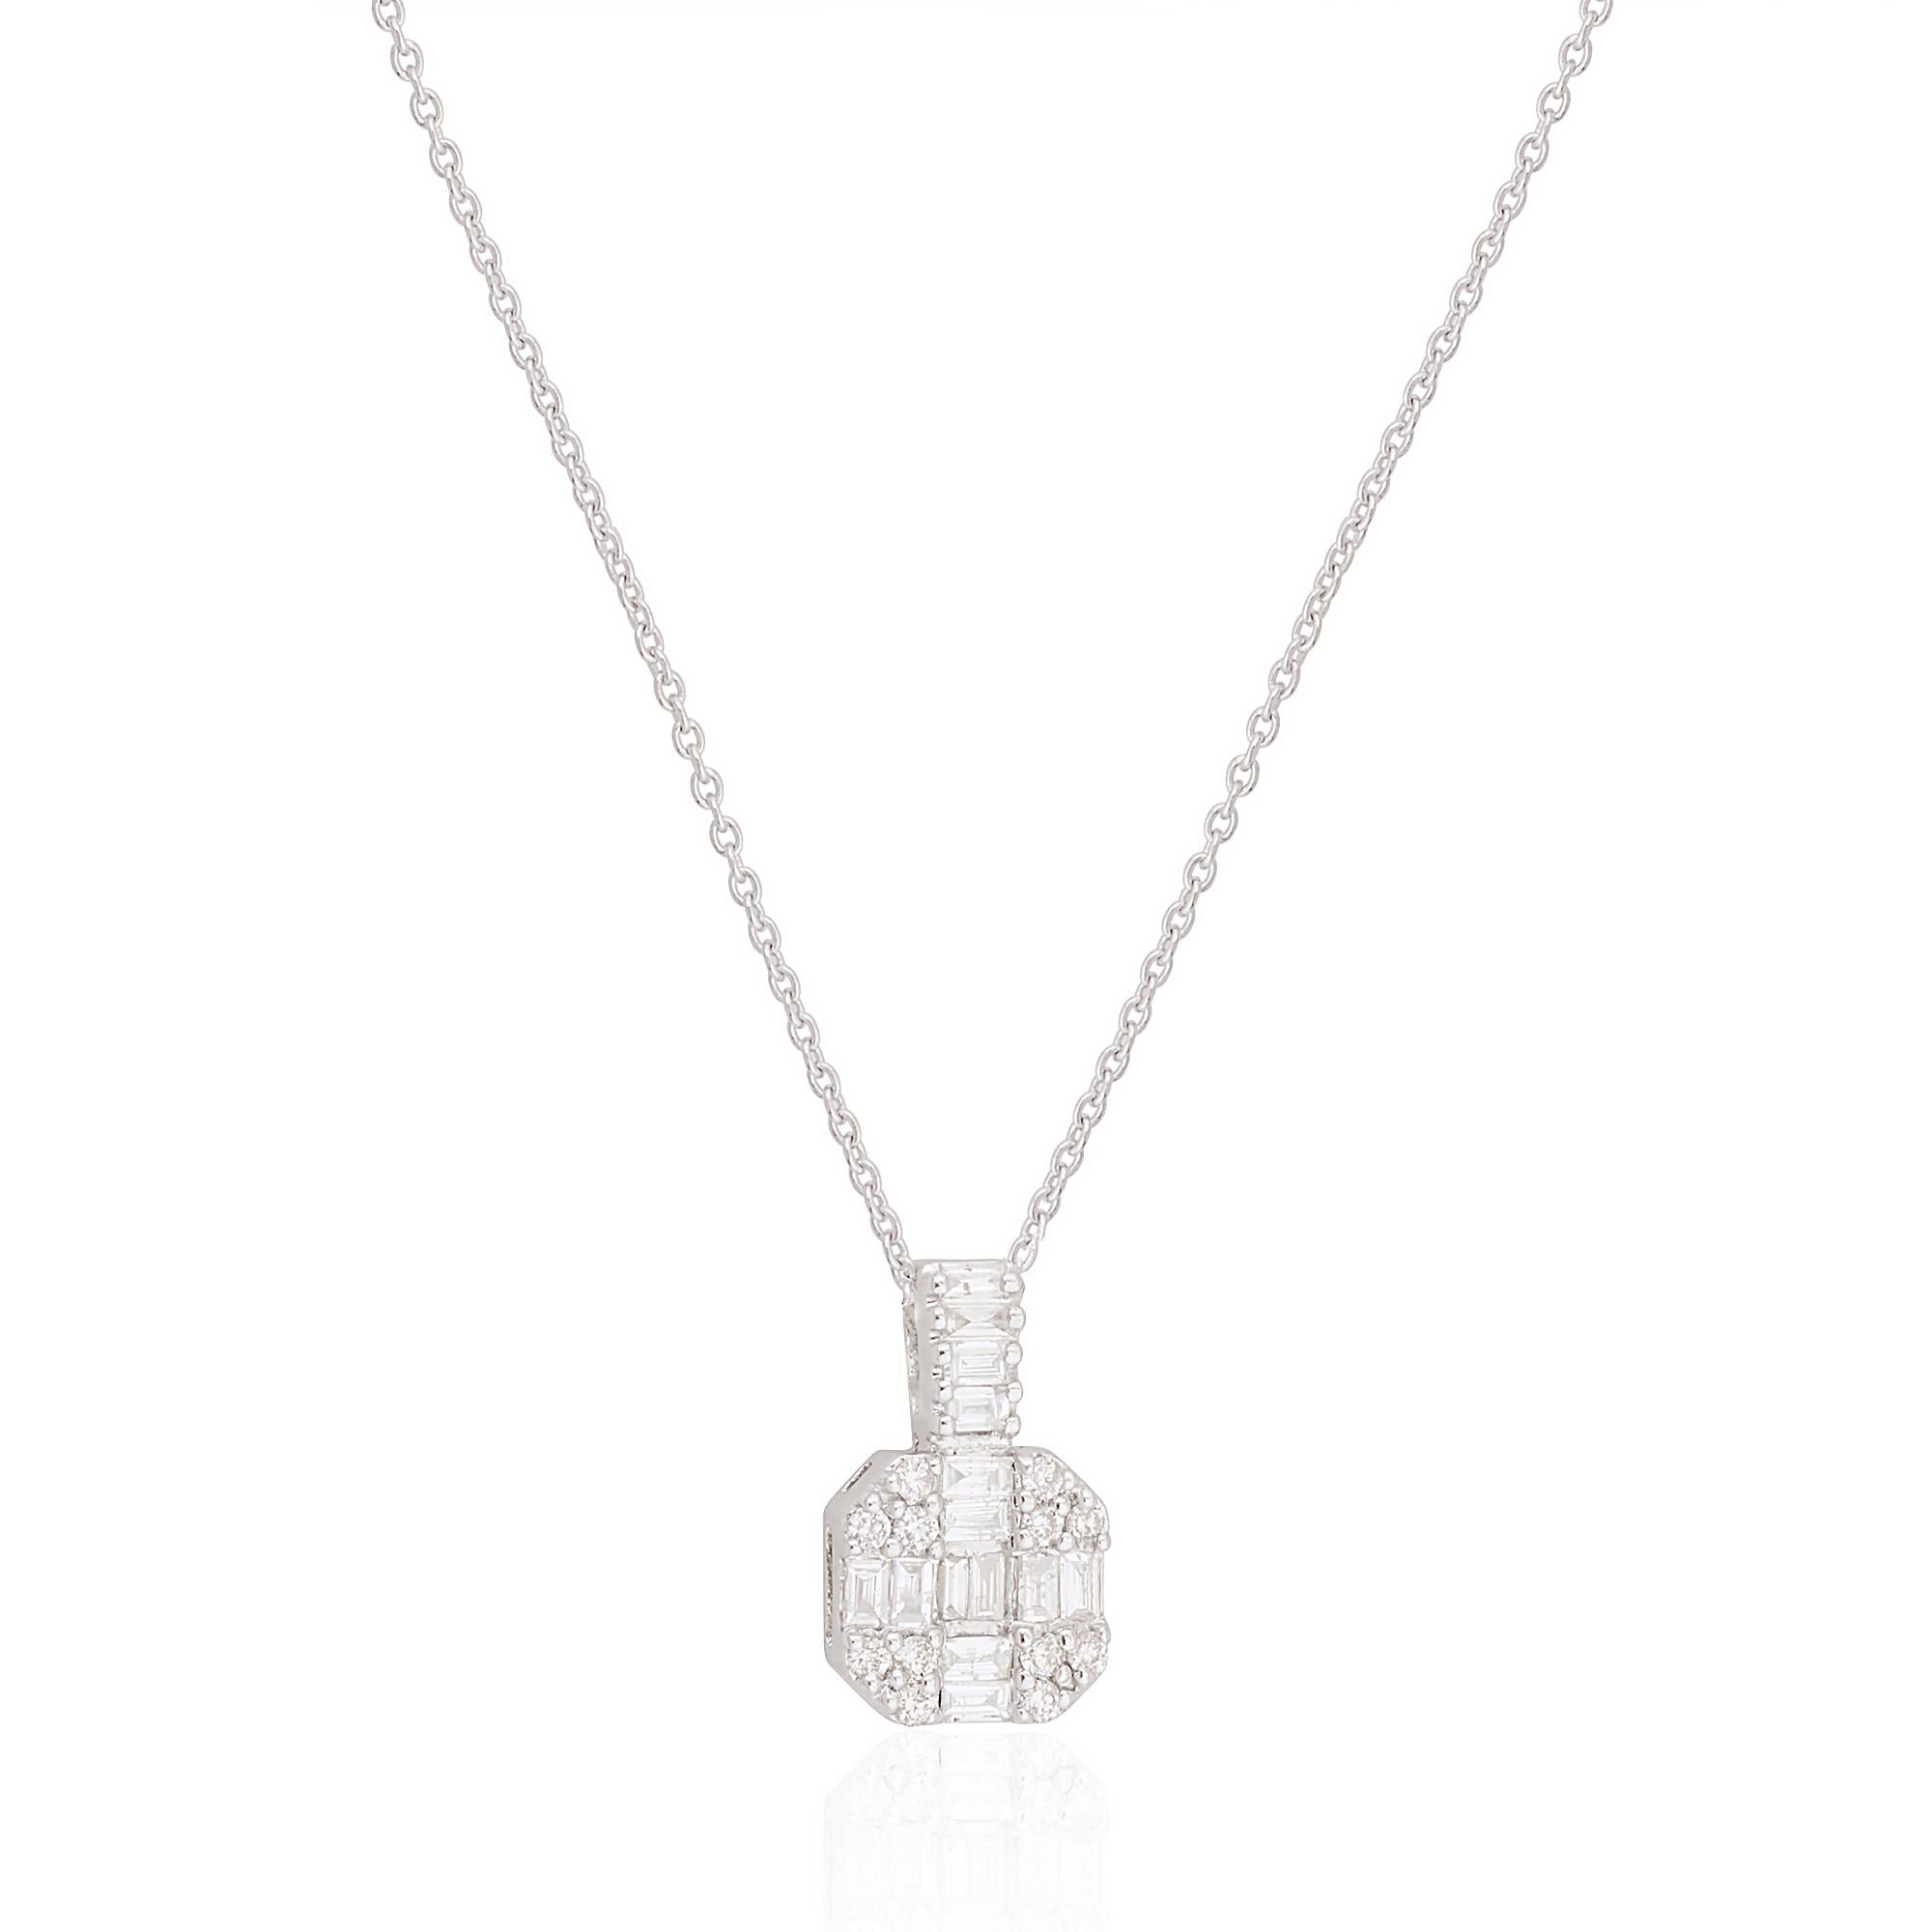 The focal point of this necklace is the mesmerizing baguette diamond charm pendant. The charm features carefully selected baguette-cut diamonds with a total weight of 0.40 carats. These diamonds exhibit SI clarity and HI color, ensuring a dazzling